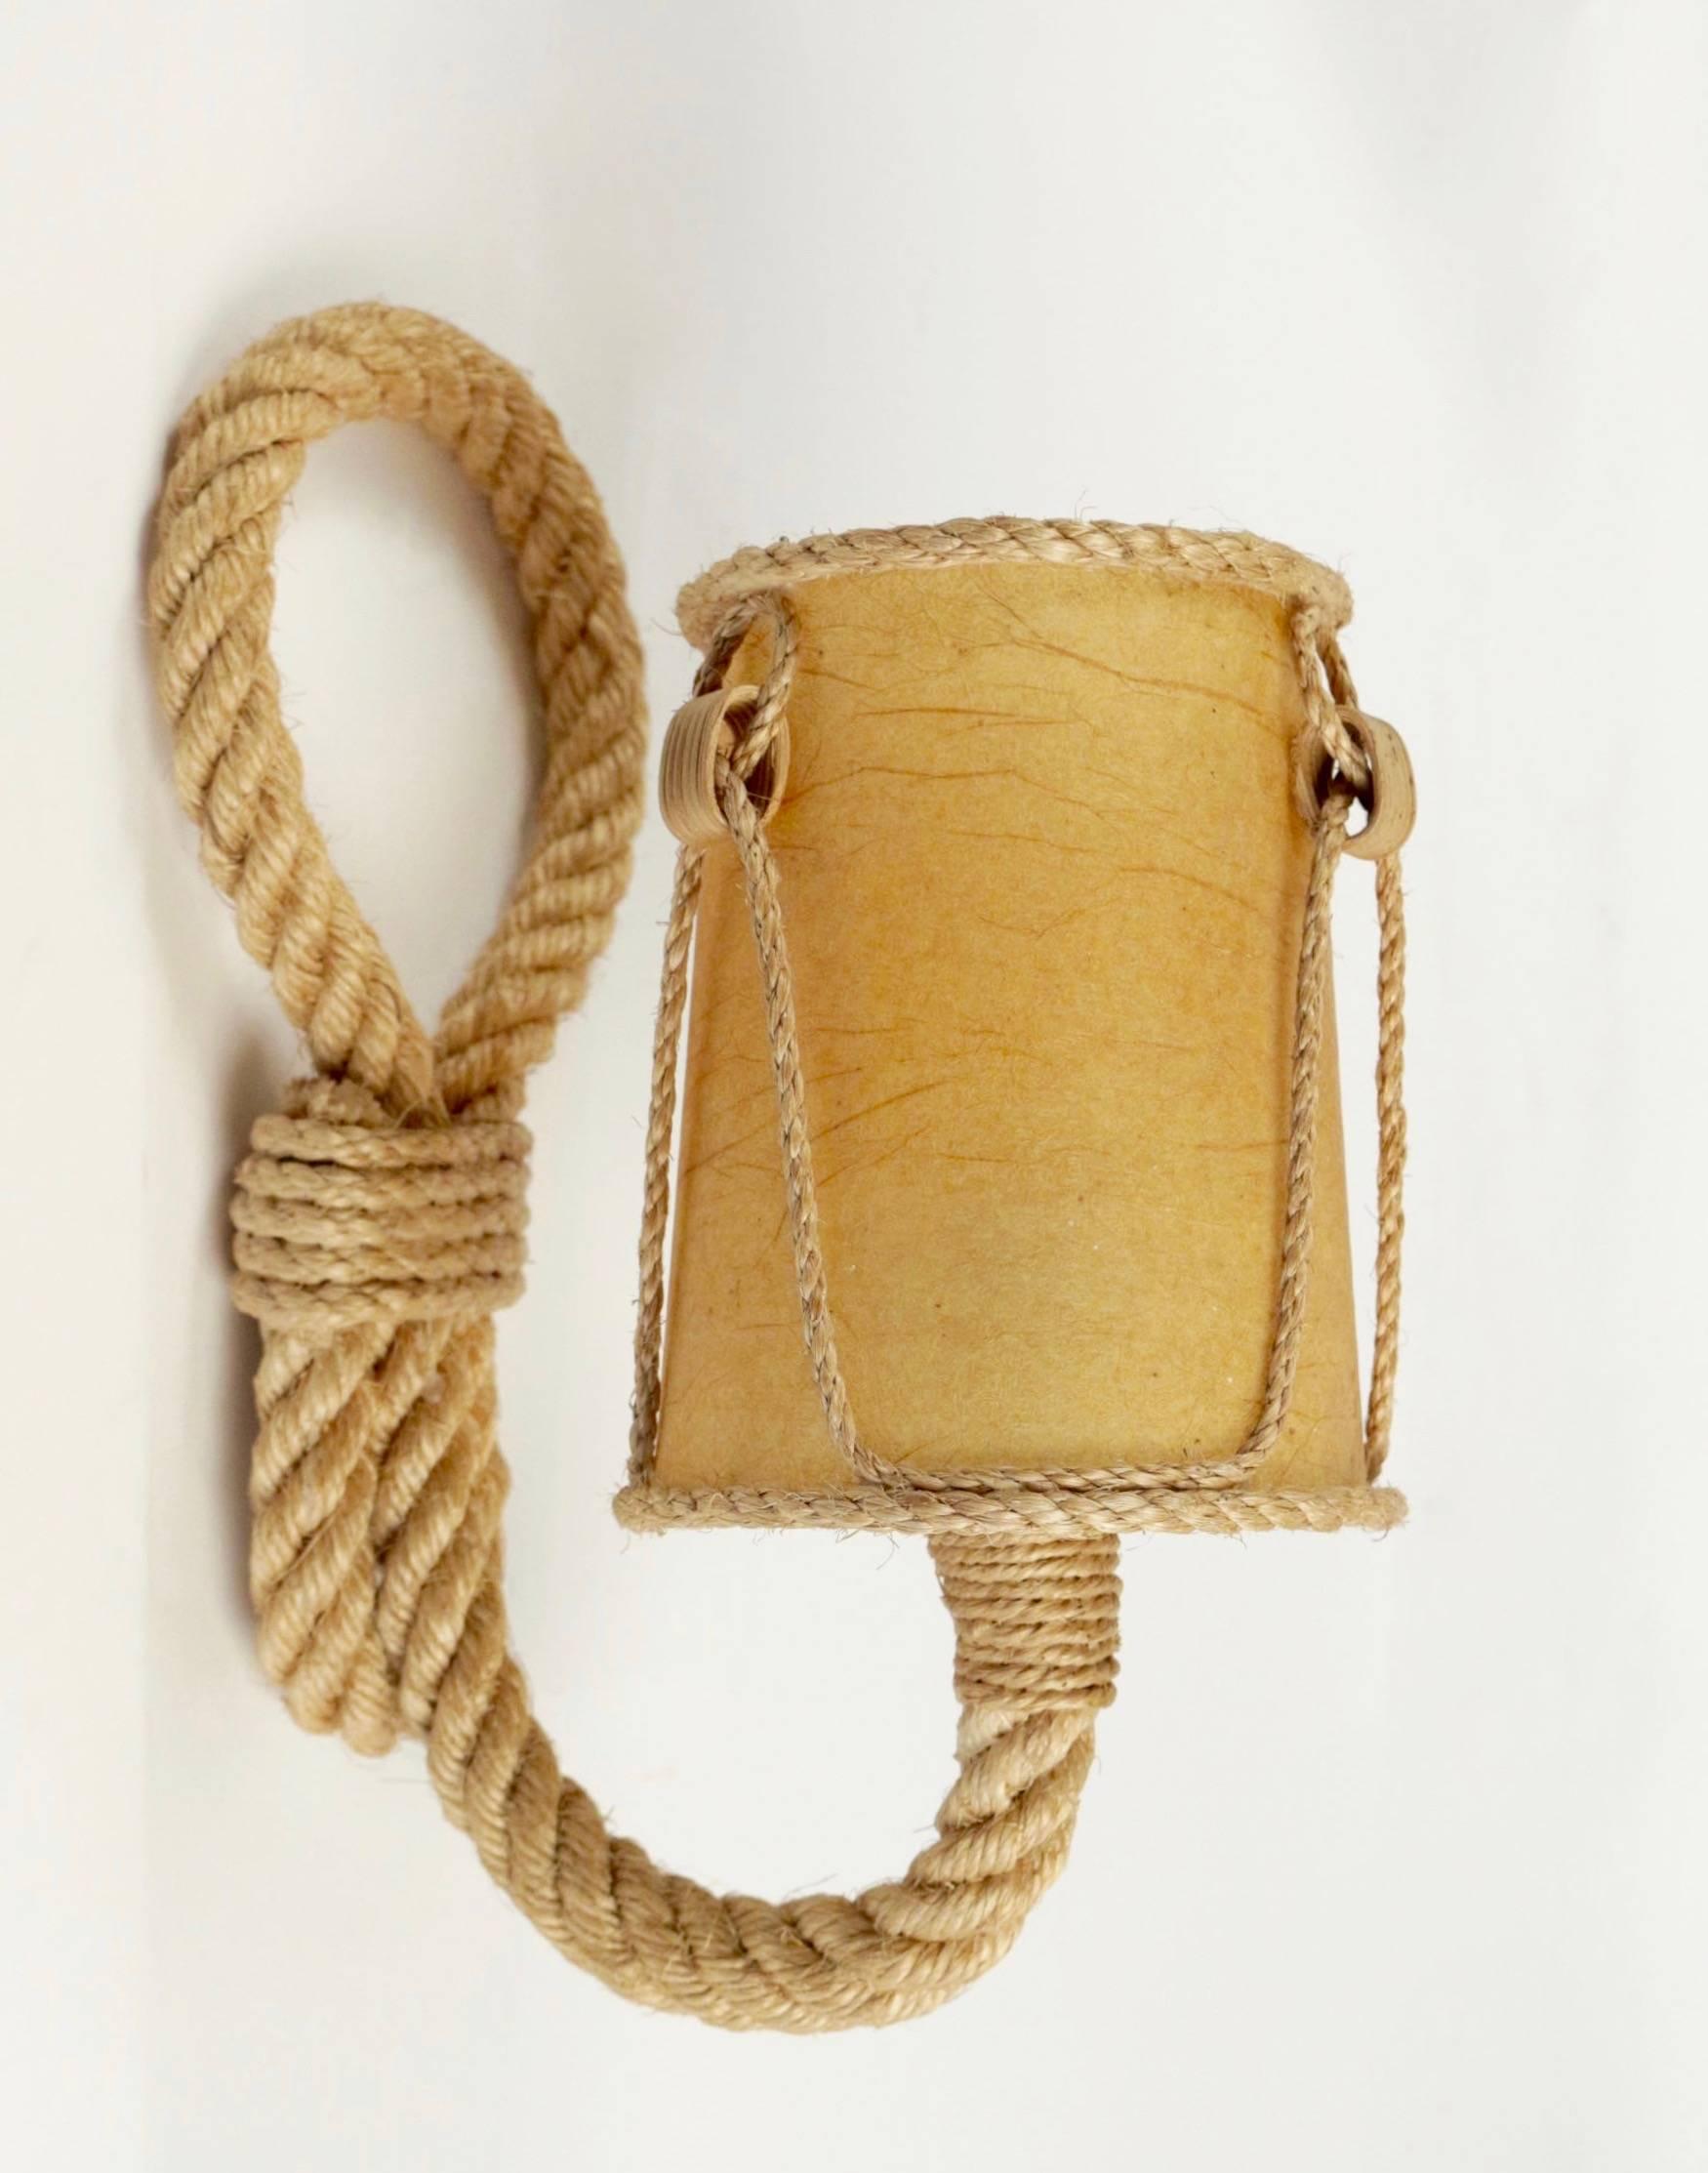 1950s pair of Audoux and Minet rope sconces school of nice.

Each sconce is composed by one buckle and one arm made of rope.
Rare original lampshades adorned with a thin cord motif.

One bulb per sconce.